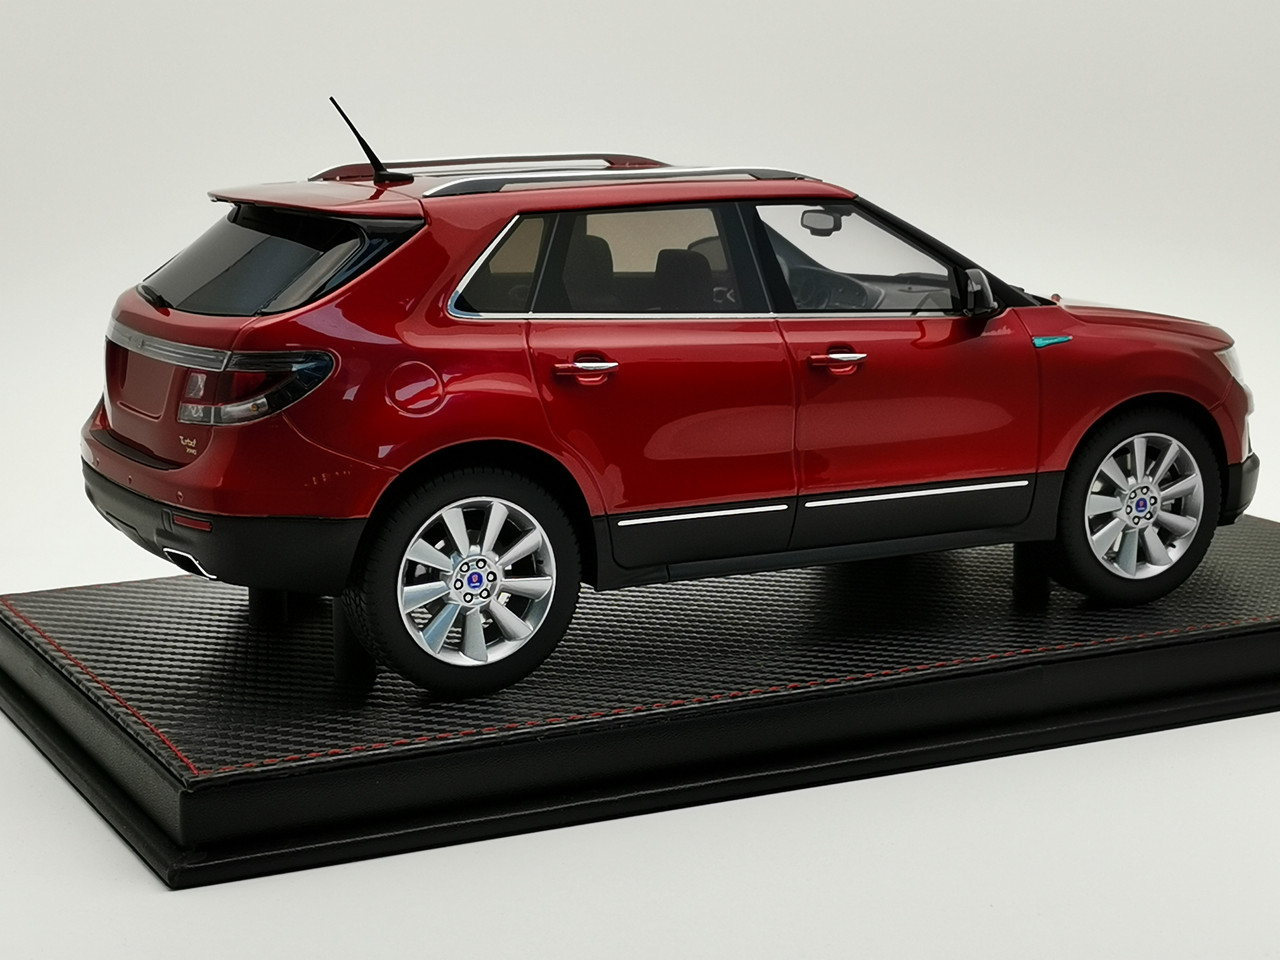 1/18 Topwing Saab 9-4X (Red) Resin Car Model Limited